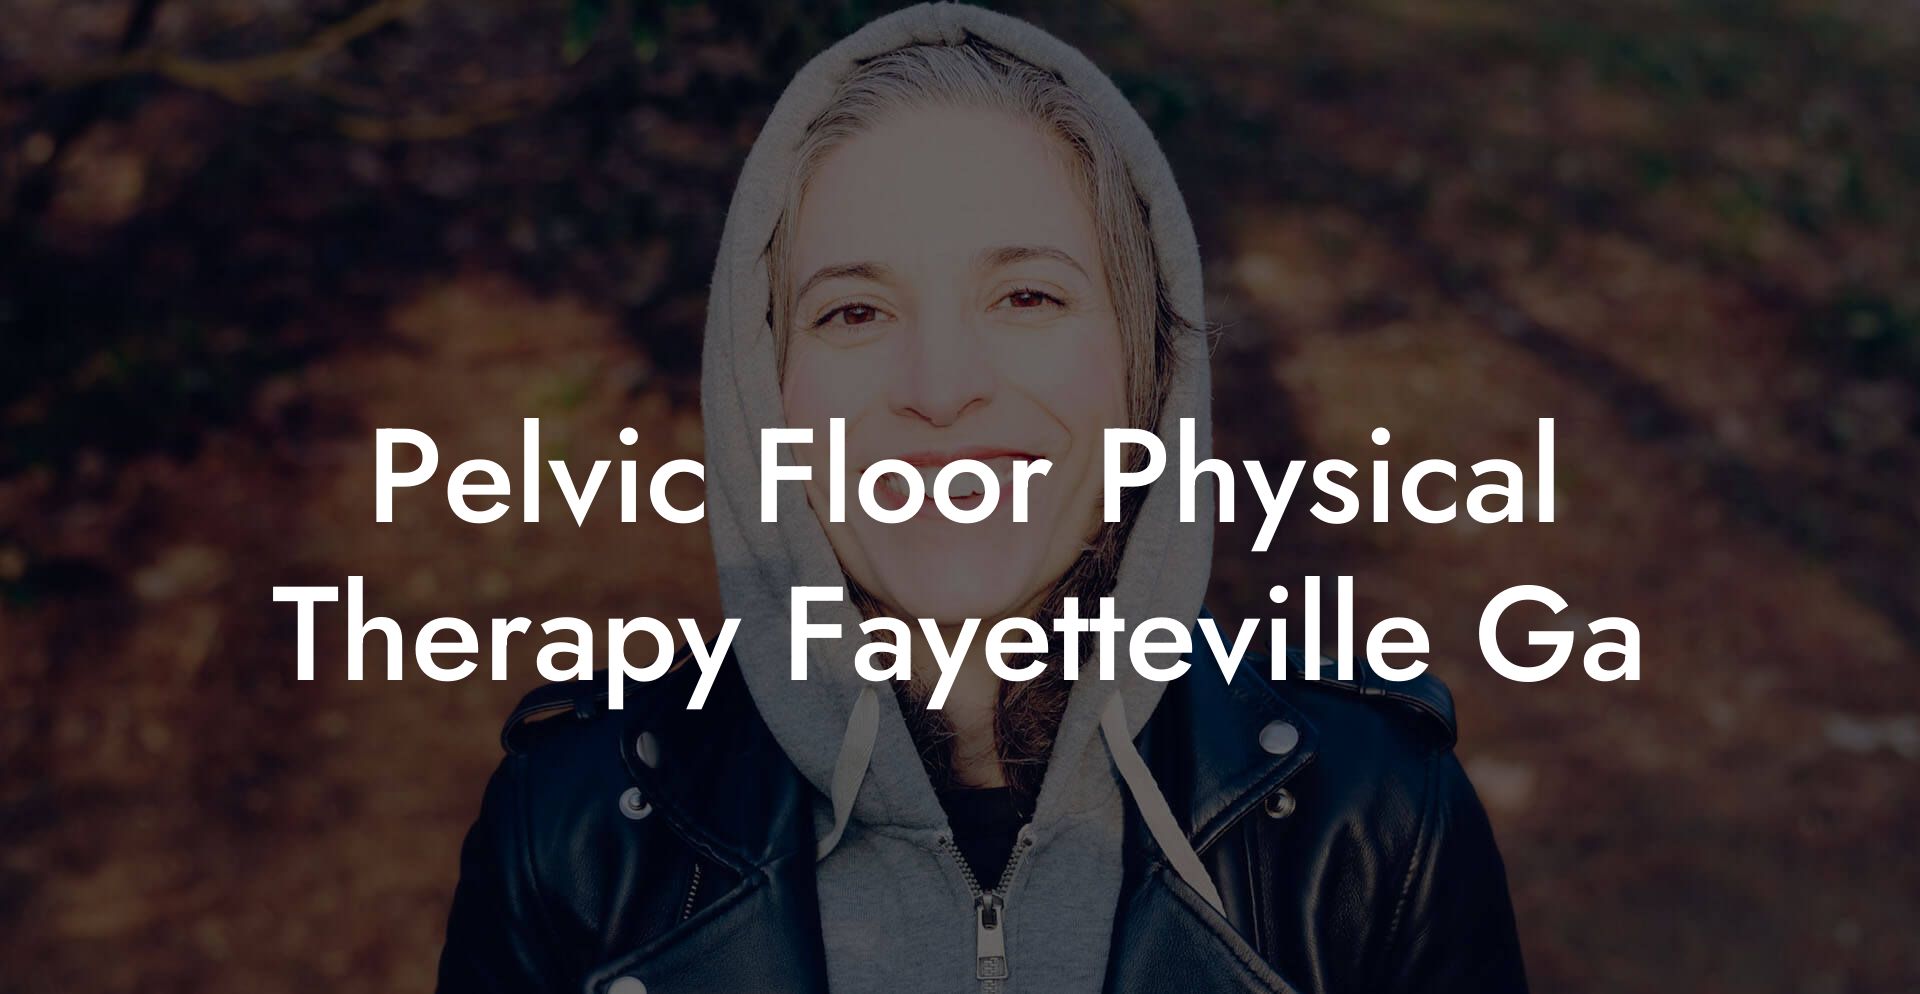 Pelvic Floor Physical Therapy Fayetteville Ga